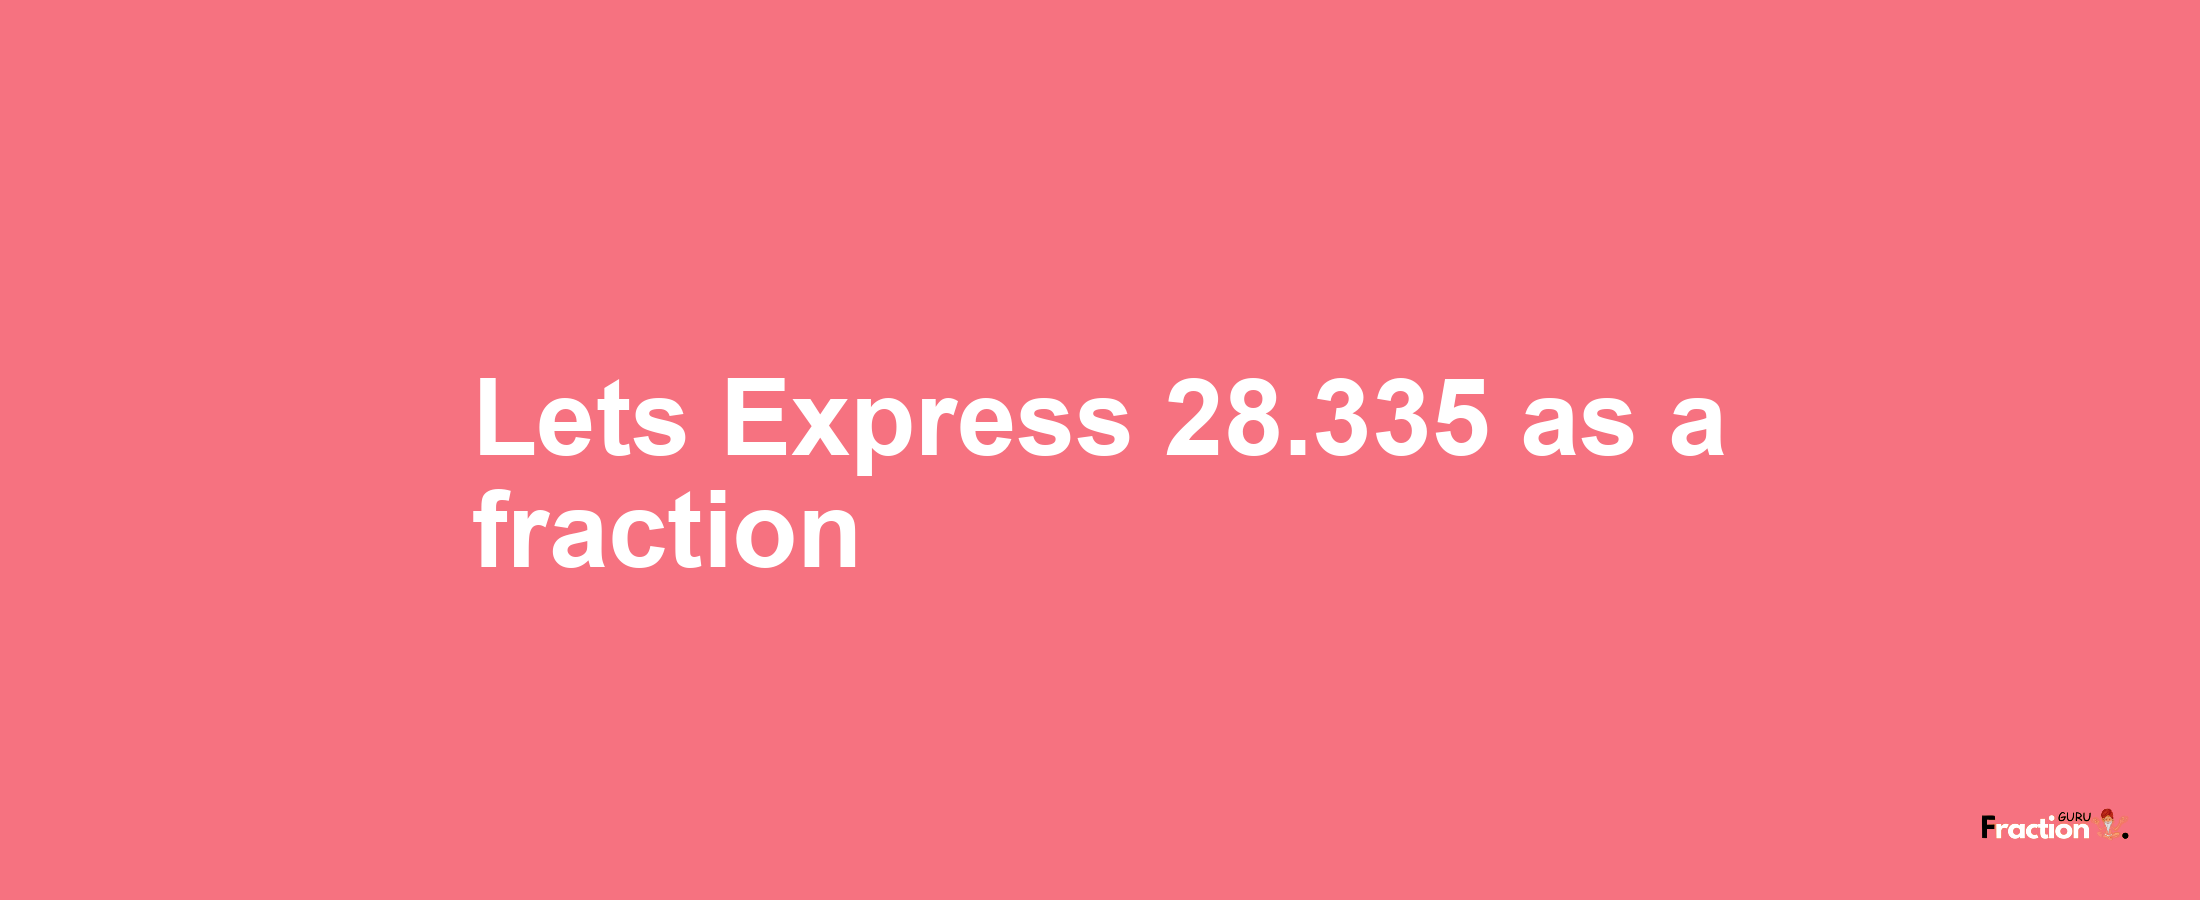 Lets Express 28.335 as afraction